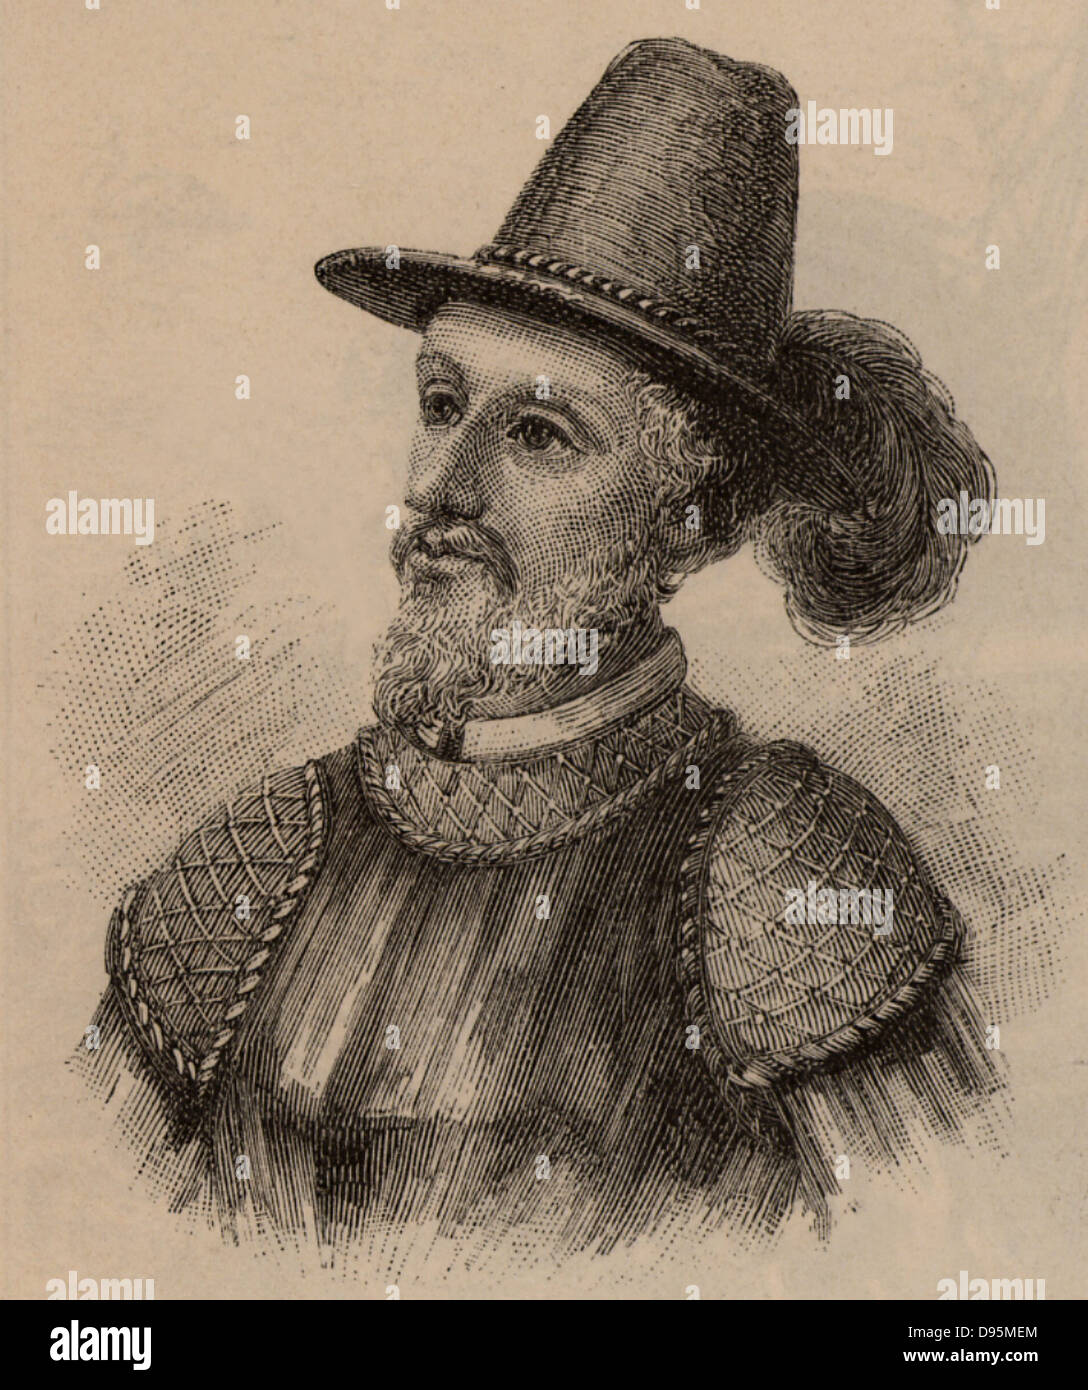 Juan Ponce De Leon (1460-1521) Spanish soldier and public servant who sailed with Columbus on his second voyage. Appointed by the Spanish government fo colonise Puerto Rico. Discovered Florida in April 1513. Late 19th century engraving. Stock Photo